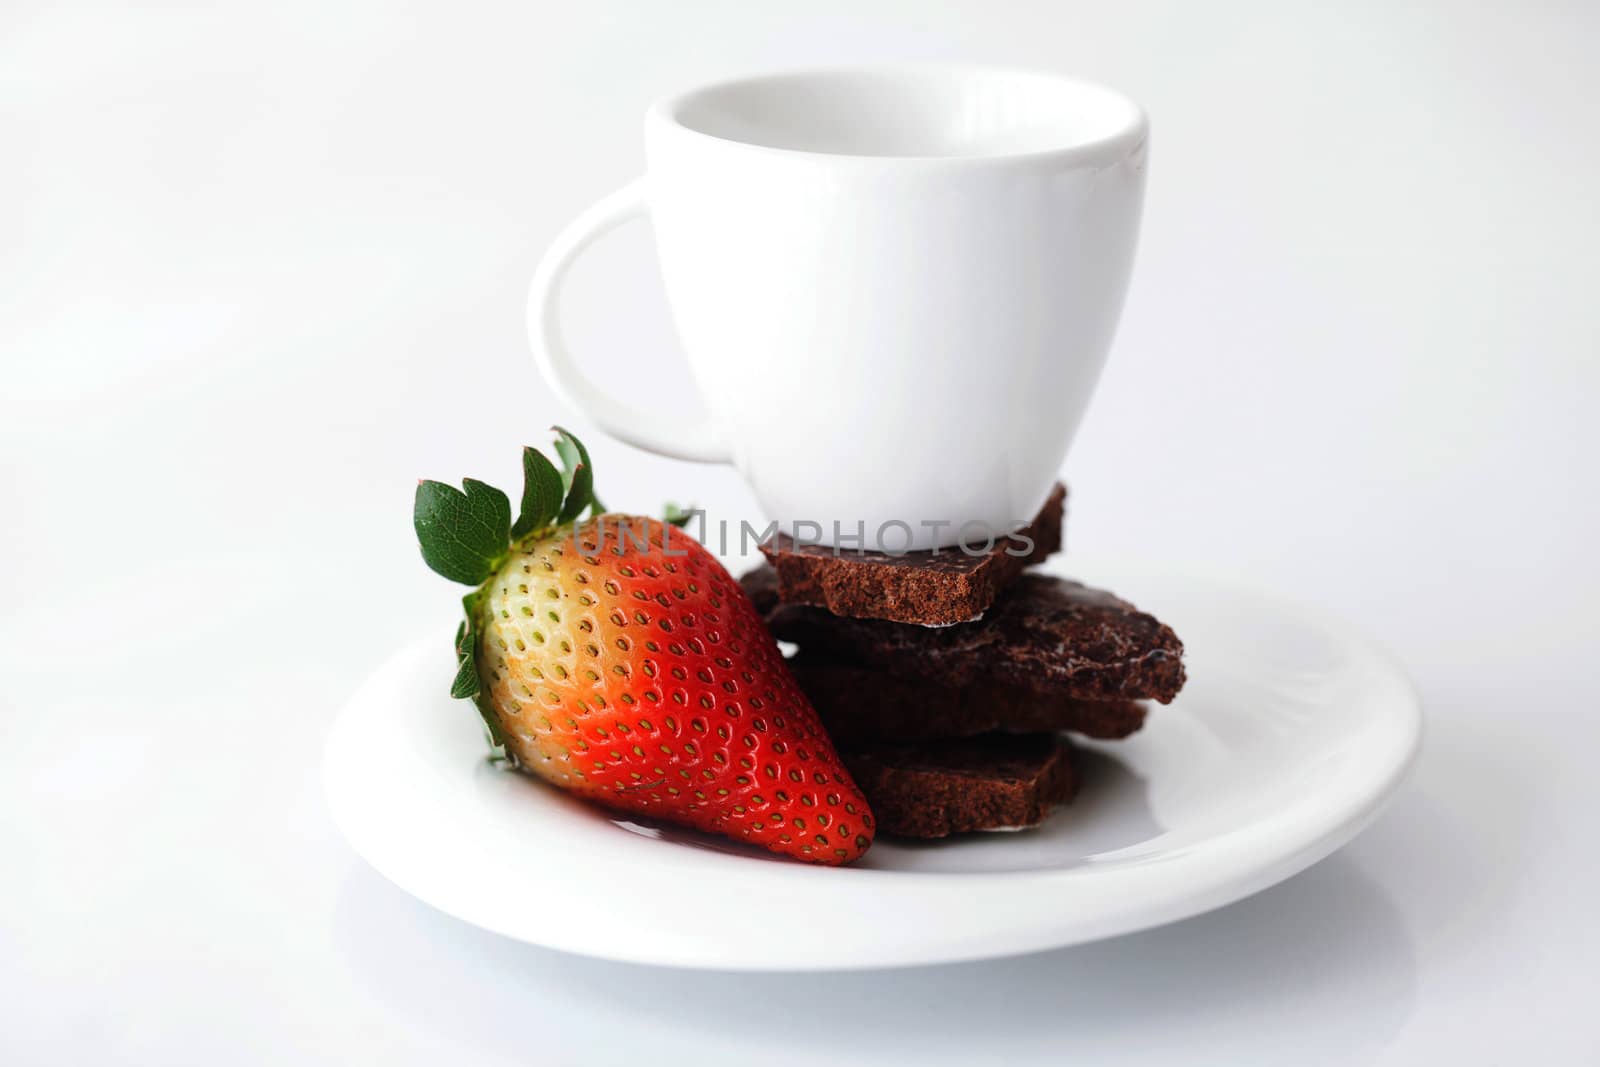 white cup with saucer, chocolate and strawberry